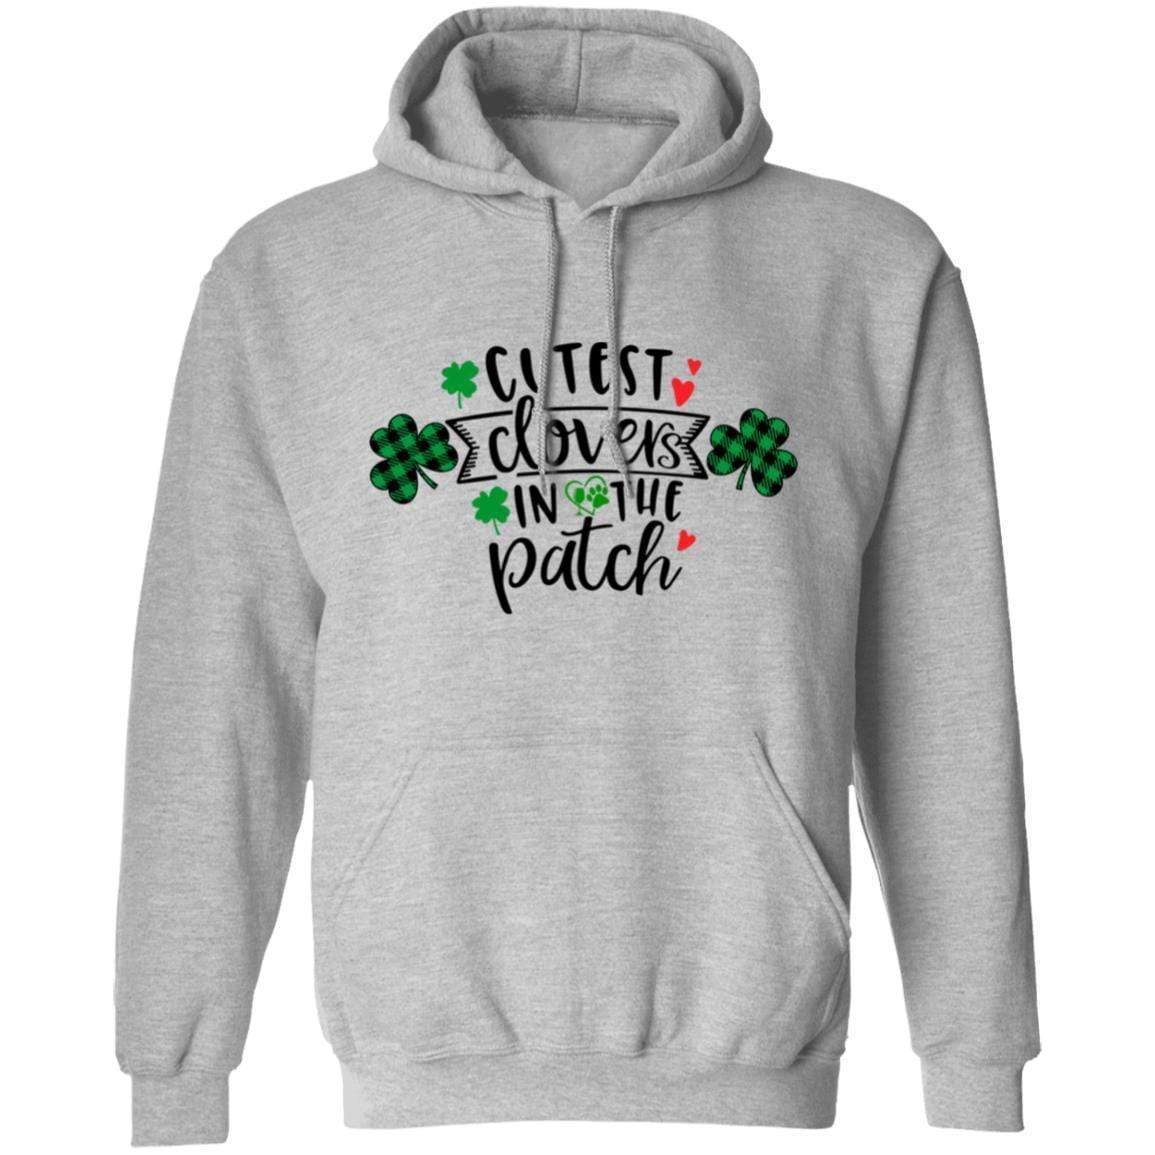 Sweatshirts Sport Grey / S Winey Bitches Co "Cutest Clovers in the Patch" Pullover Hoodie 8 oz. WineyBitchesCo